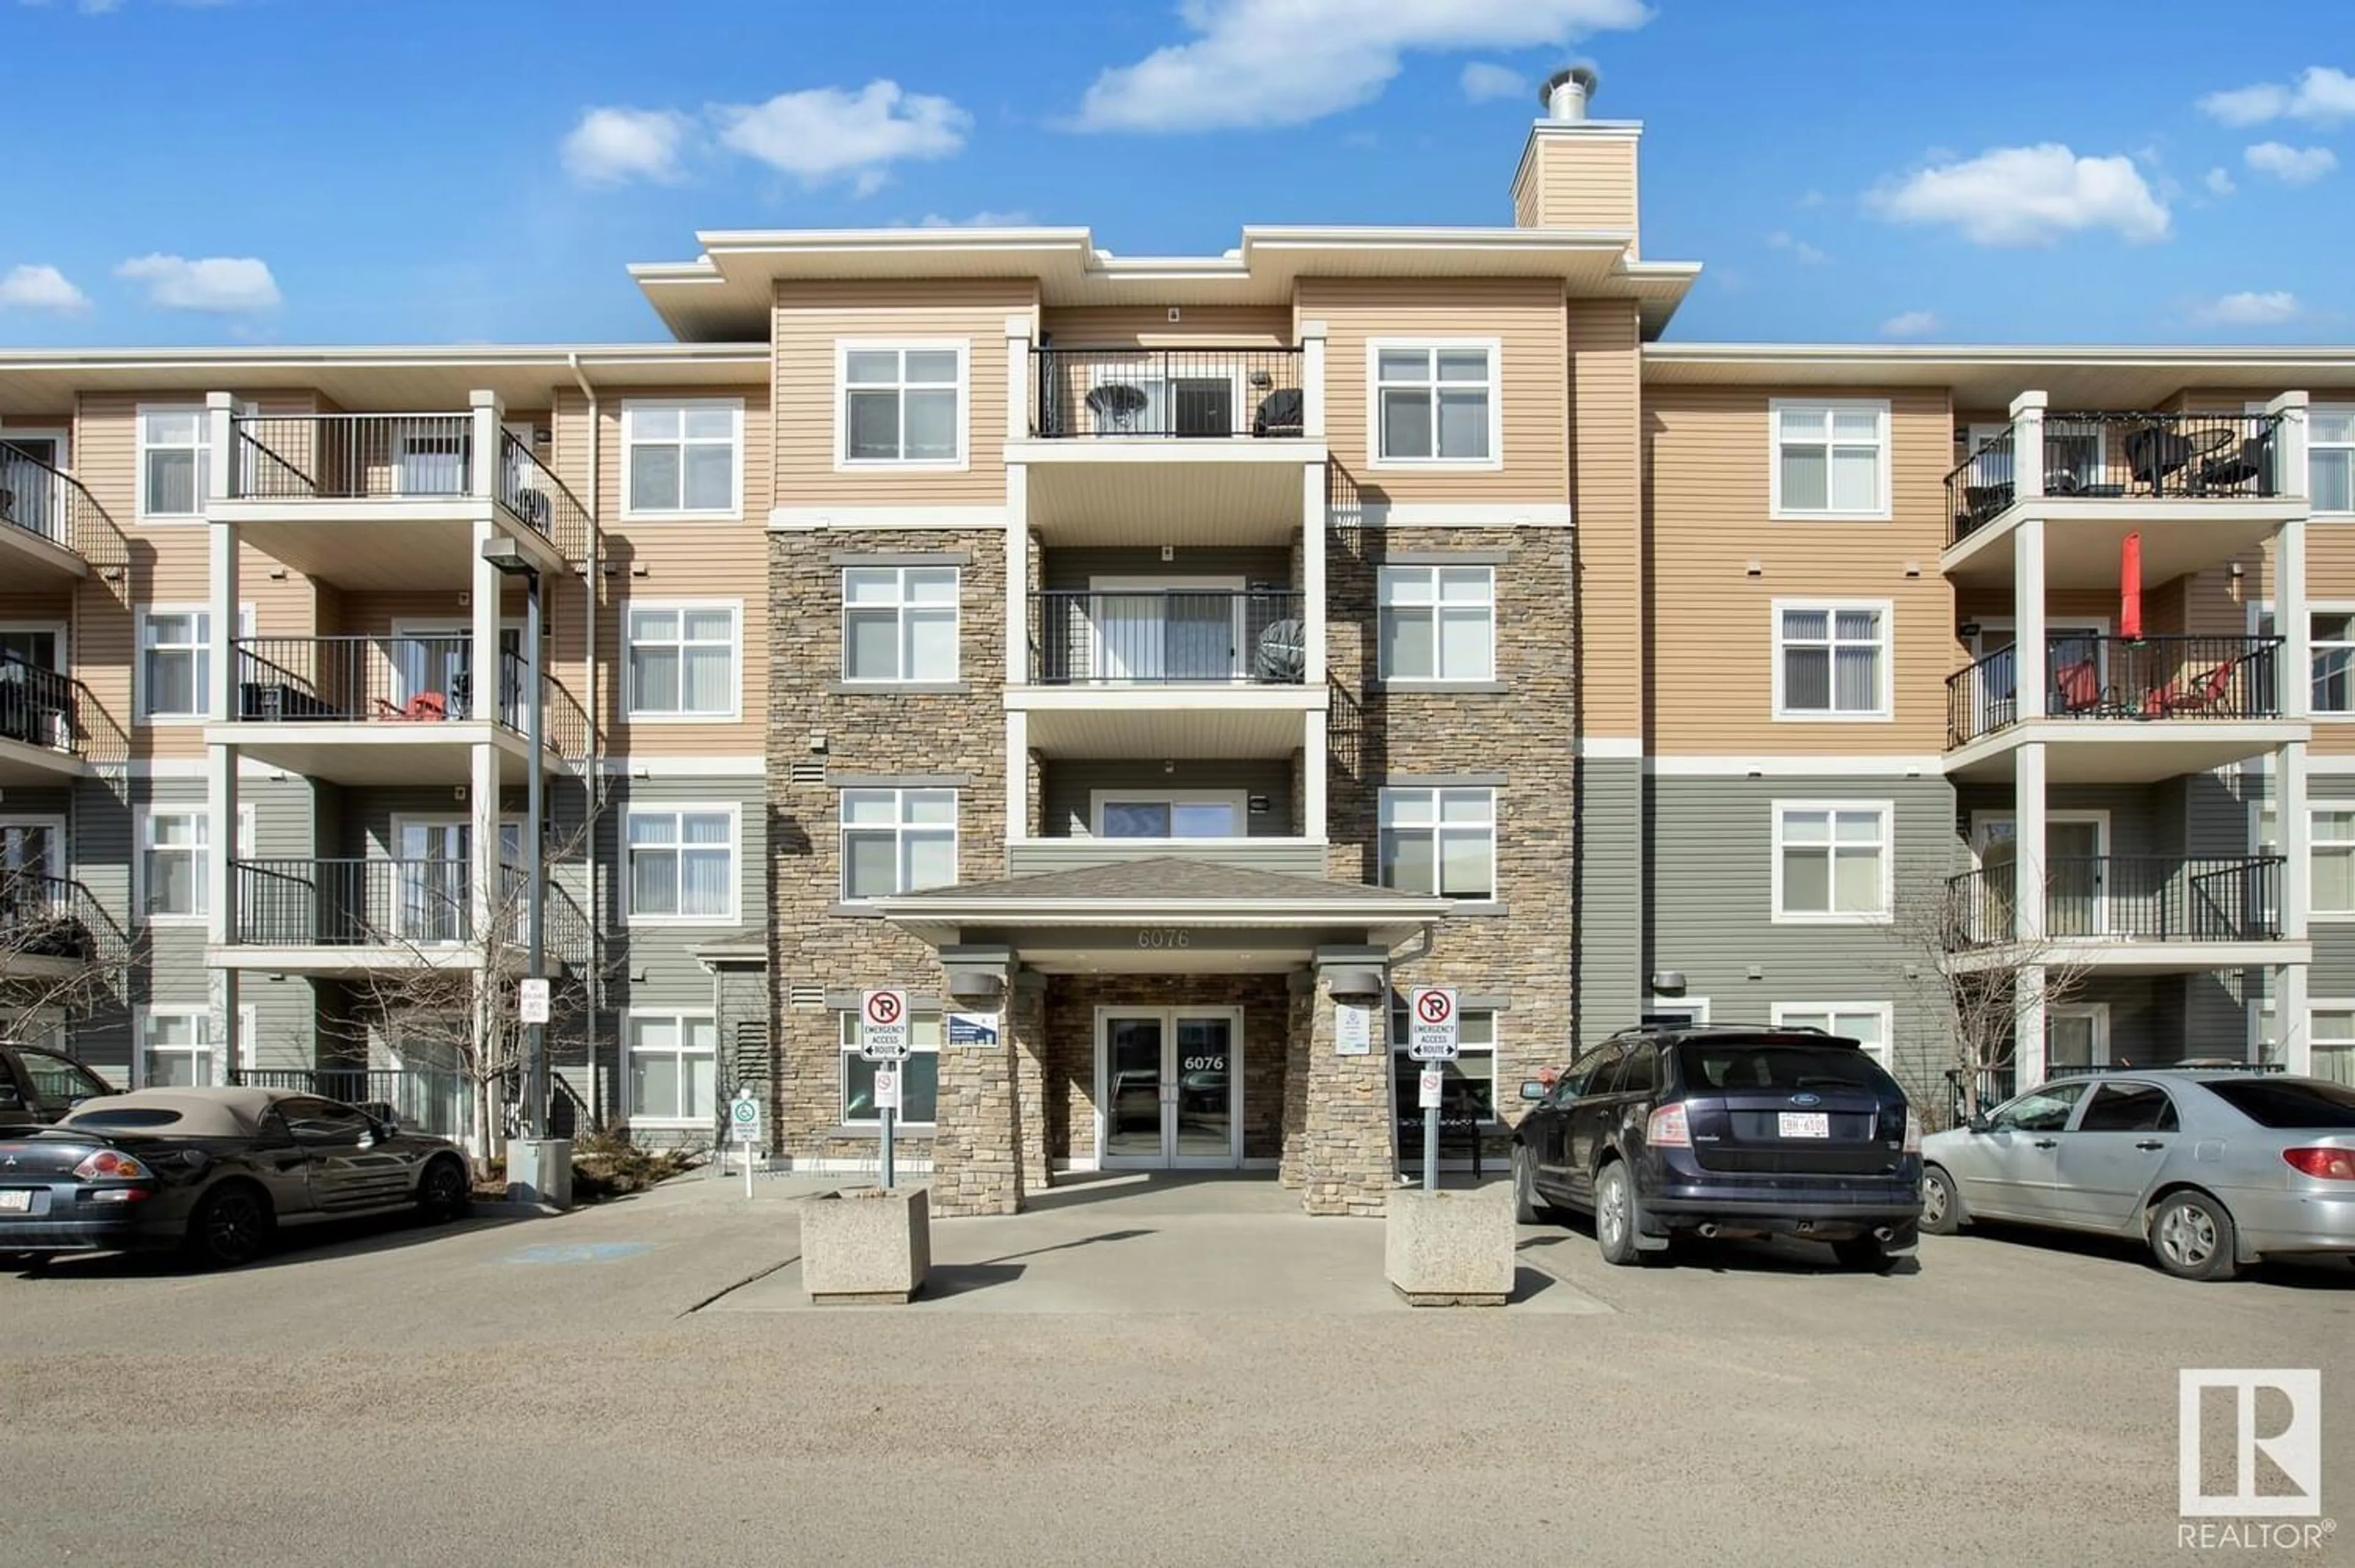 A pic from exterior of the house or condo for #422 6076 SCHONSEE WY NW, Edmonton Alberta T5Z0K8